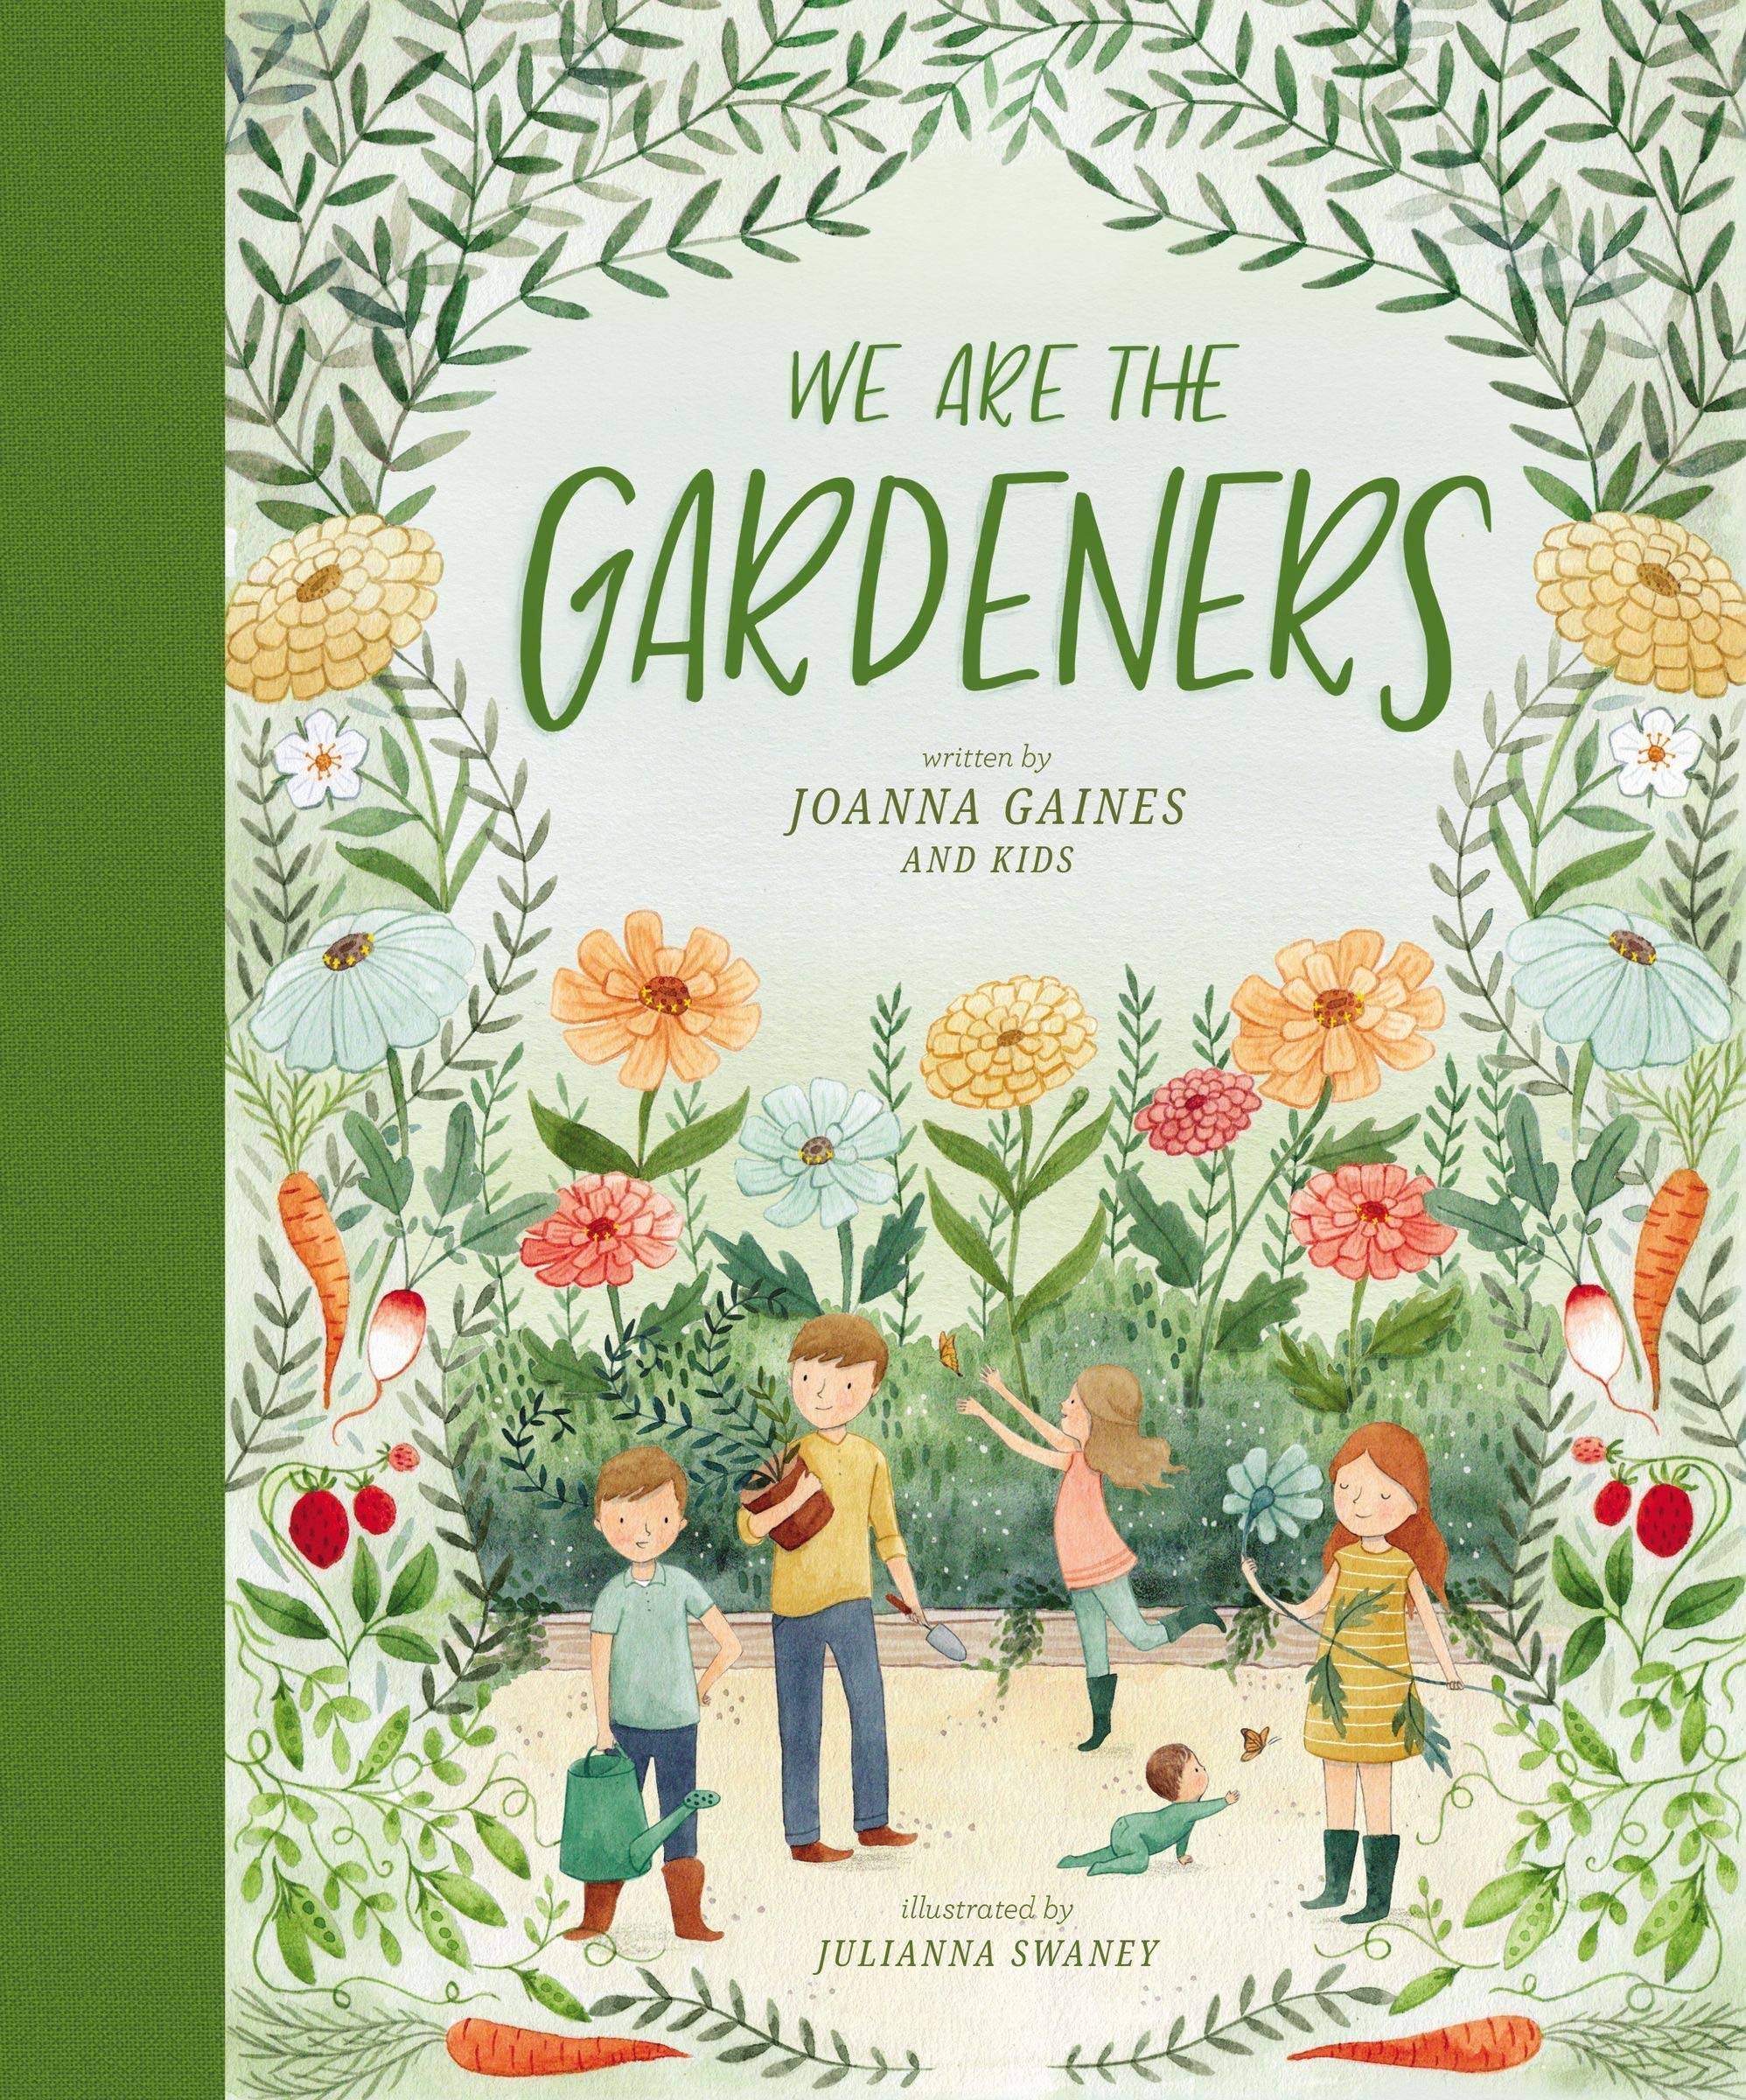 We Are the Gardeners [Book]